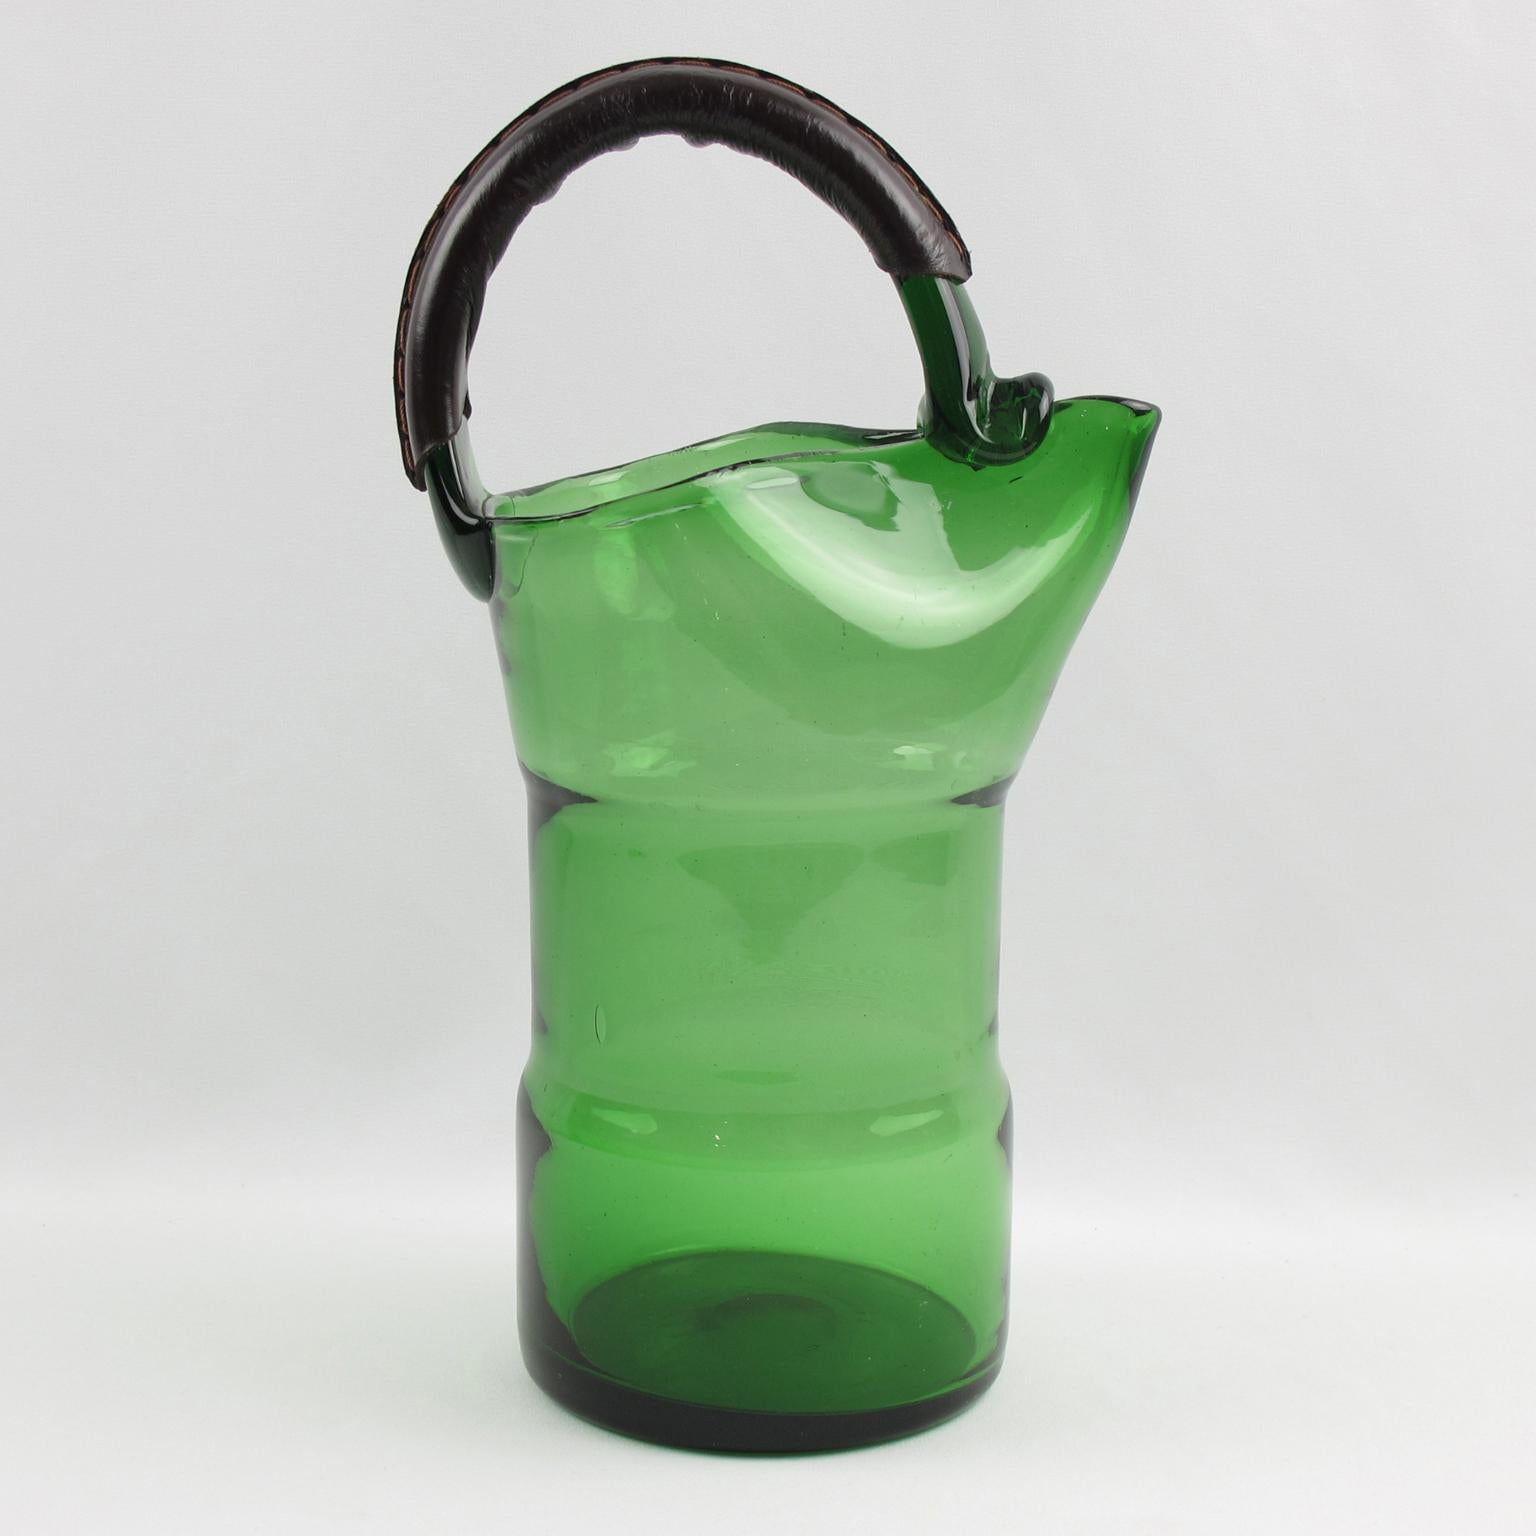 This is a stunning Italian mouth-blown glass cocktail pitcher crafted in the 1960s. This lovely green glass mixer jug is accented with a dark brown hand-stitched leather handle and is perfect for barware use and serving lemonade or water. A polished